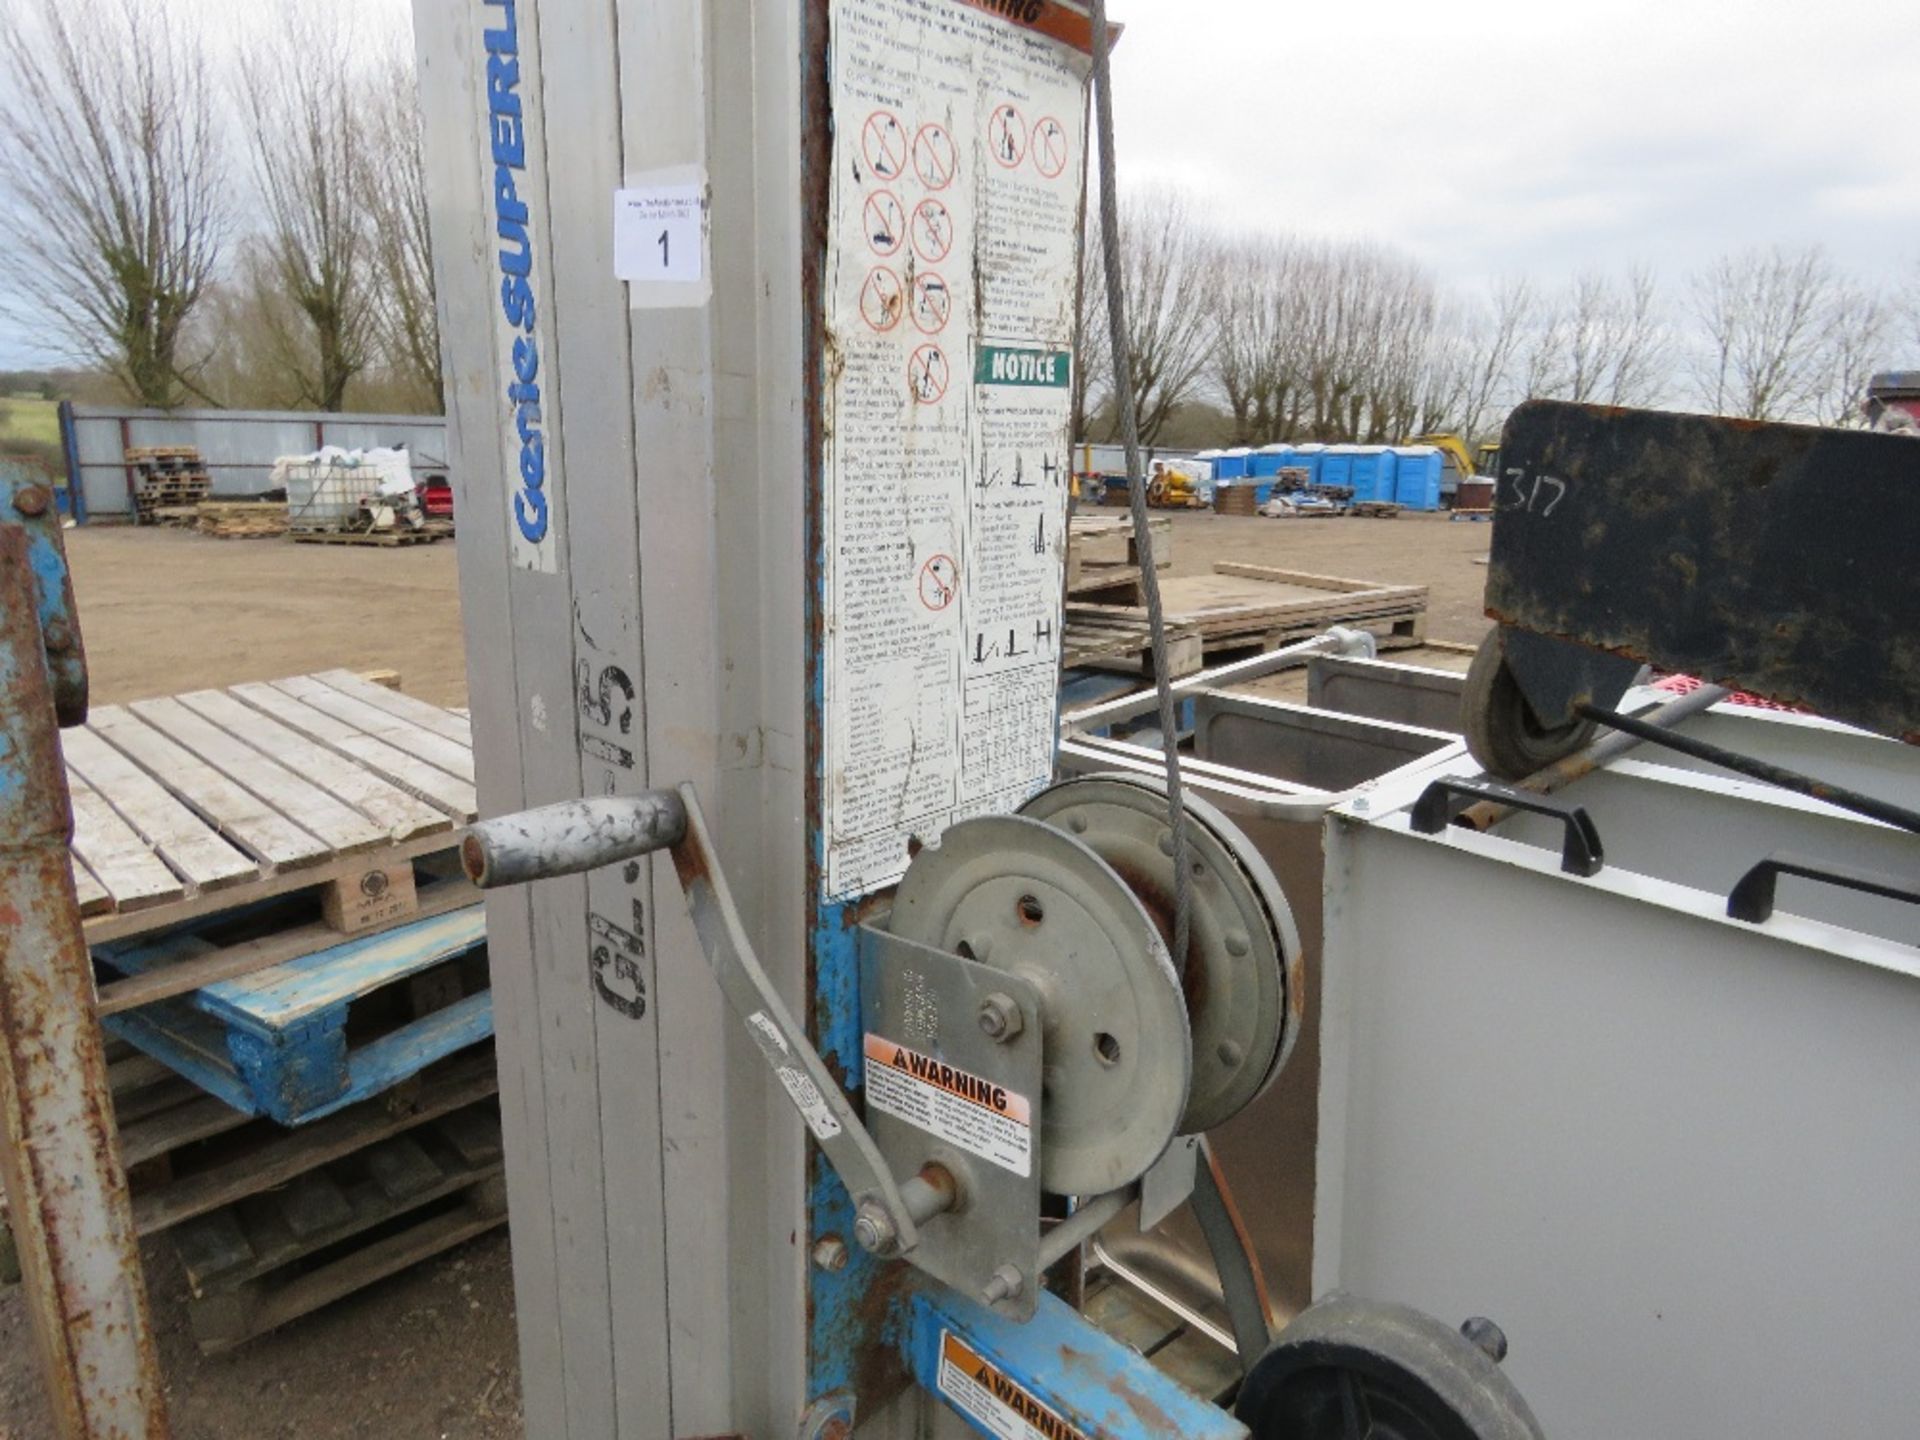 GENIE SL20 MANUAL OPERATED MATERIAL LIFT UNIT. WITH FORKS. DIRECT FROM LOCAL COMPANY. - Image 3 of 5